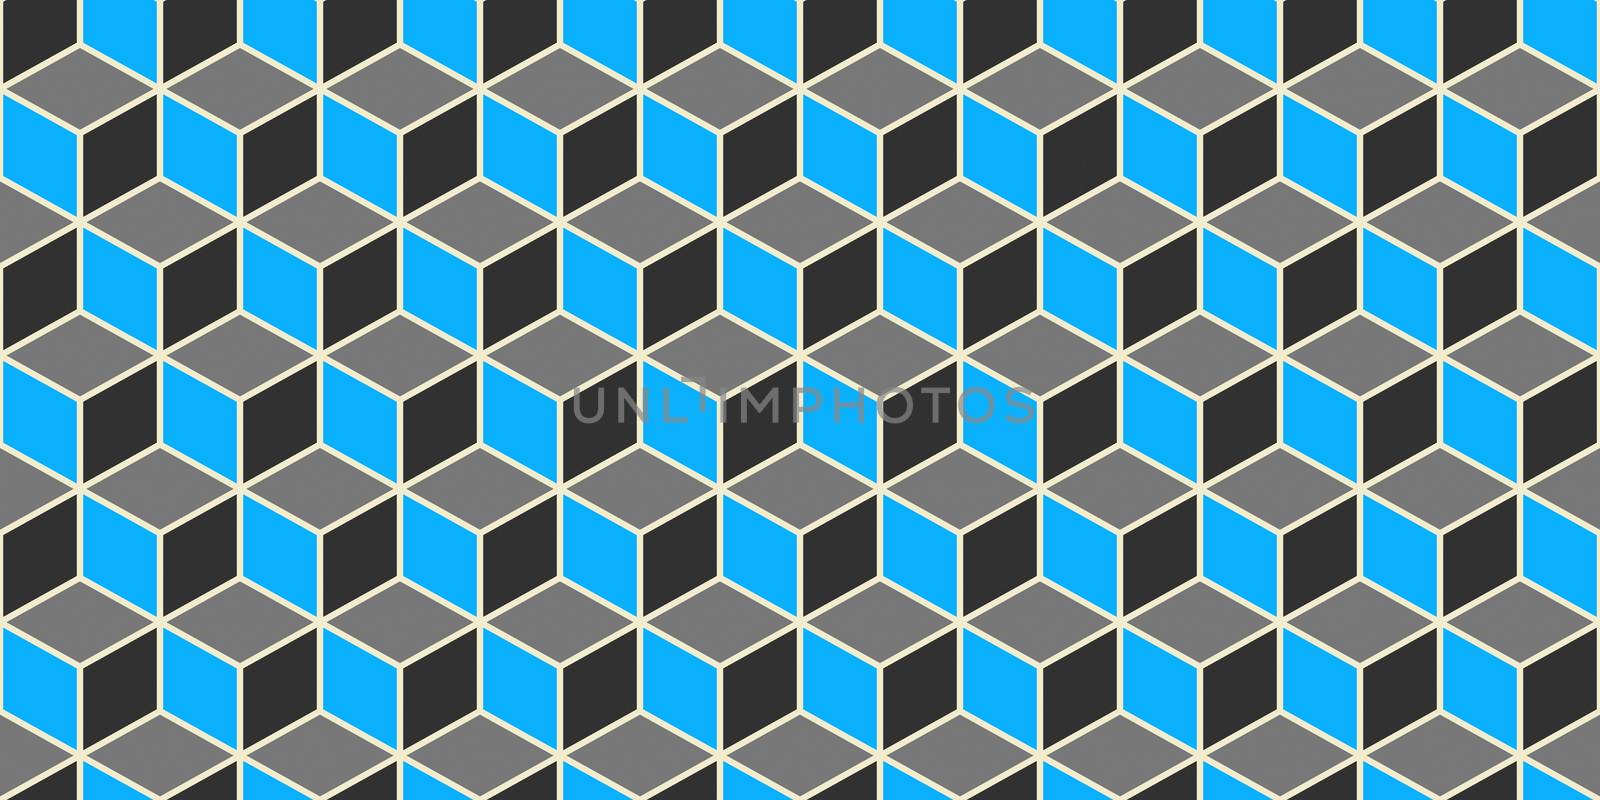 Blue Grey Seamless Cube Pattern Background. Isometric Blocks Texture. Geometric 3d Mosaic Backdrop. by sanches812